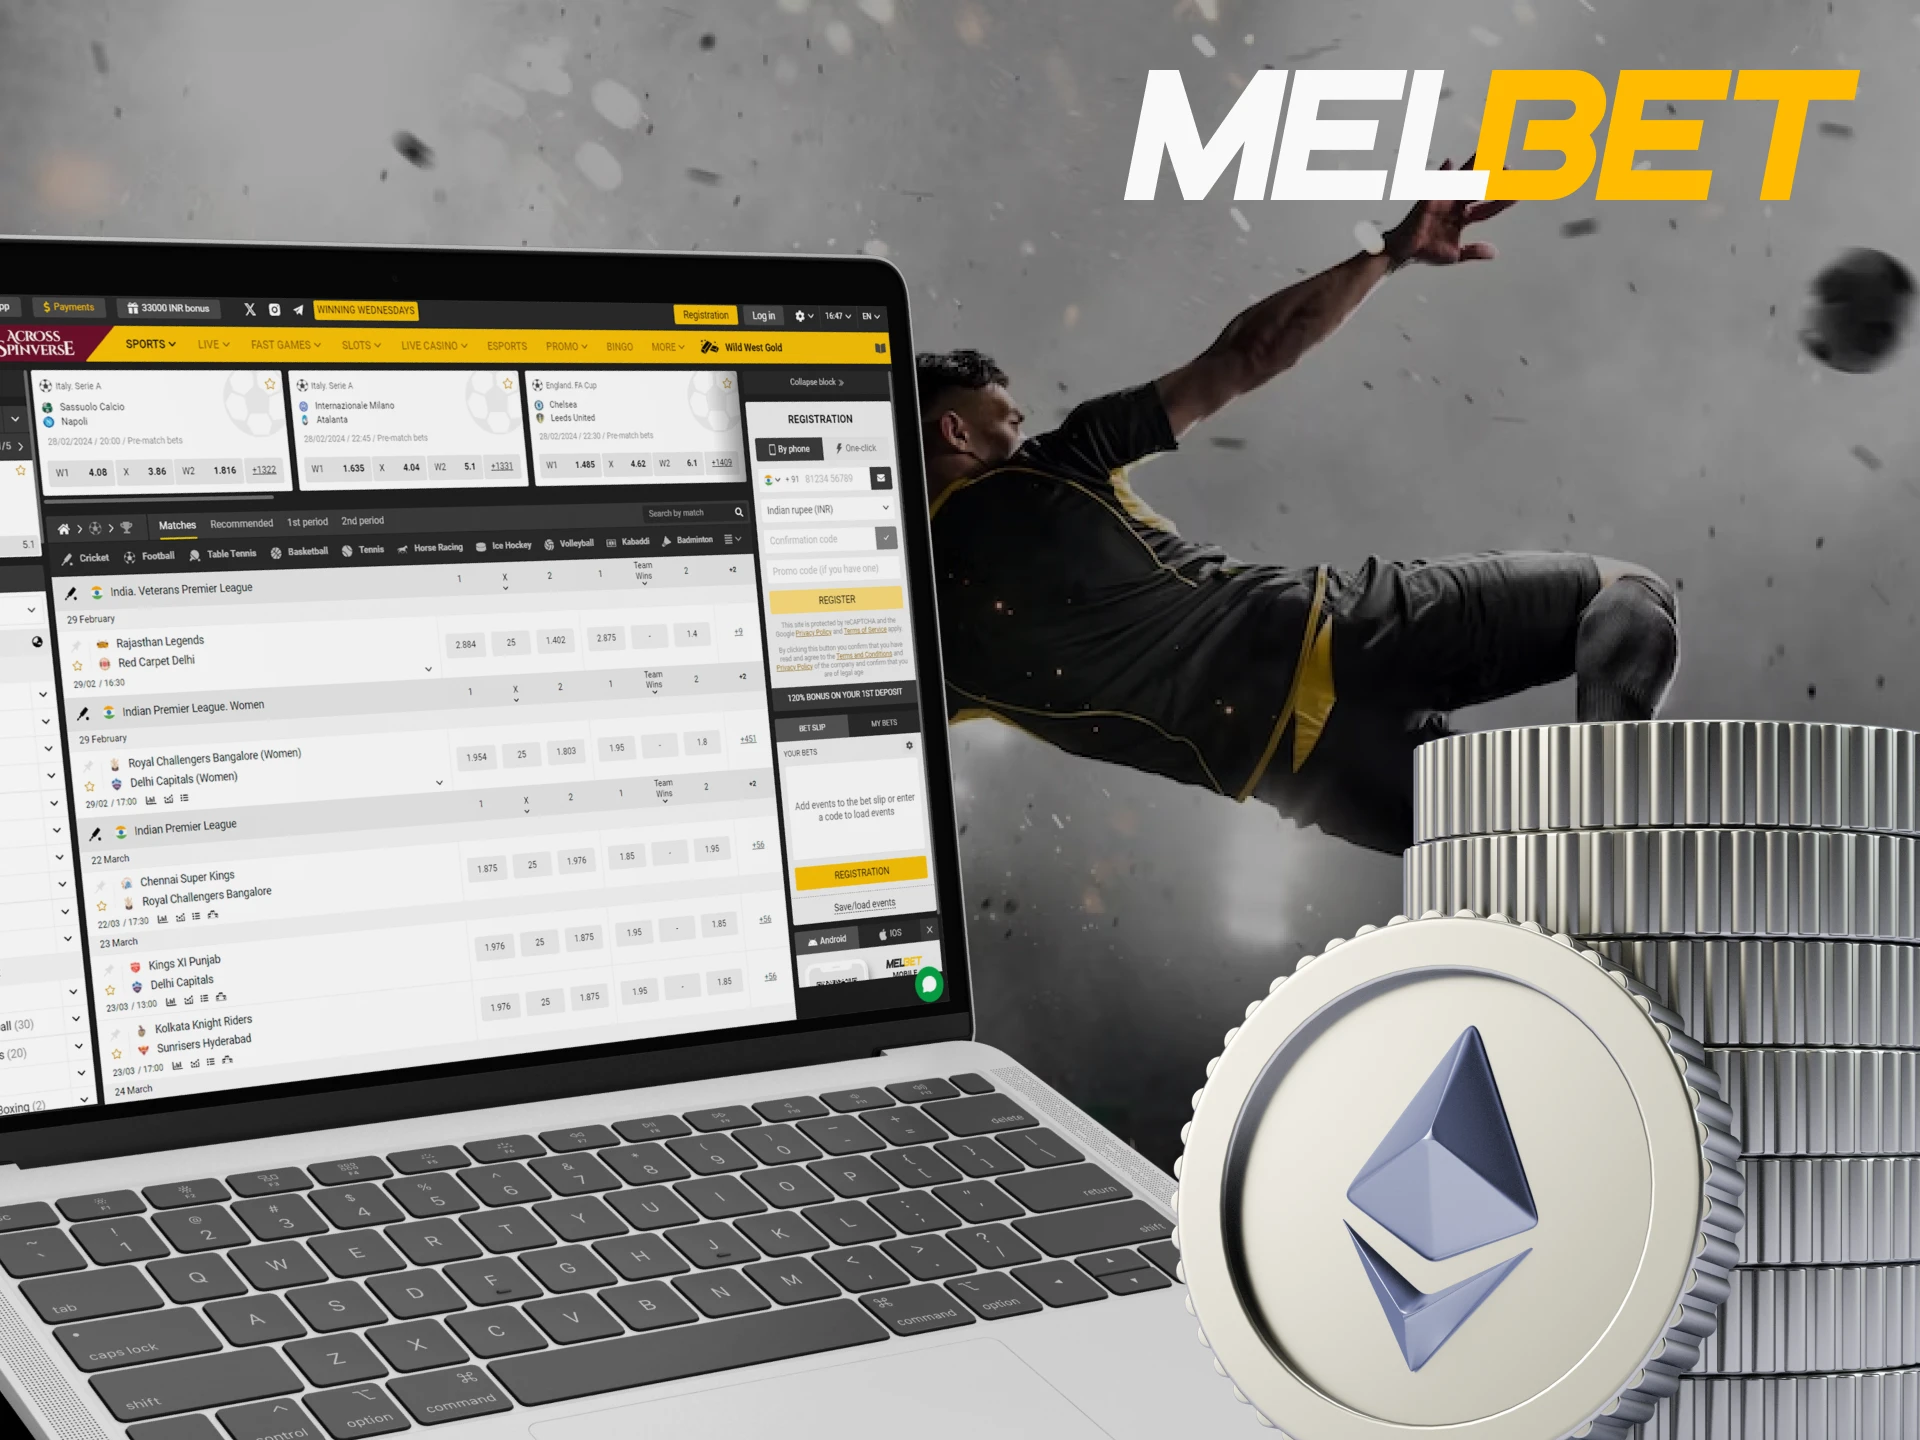 Melbet offers a variety of cryptocurrencies for sports betting.